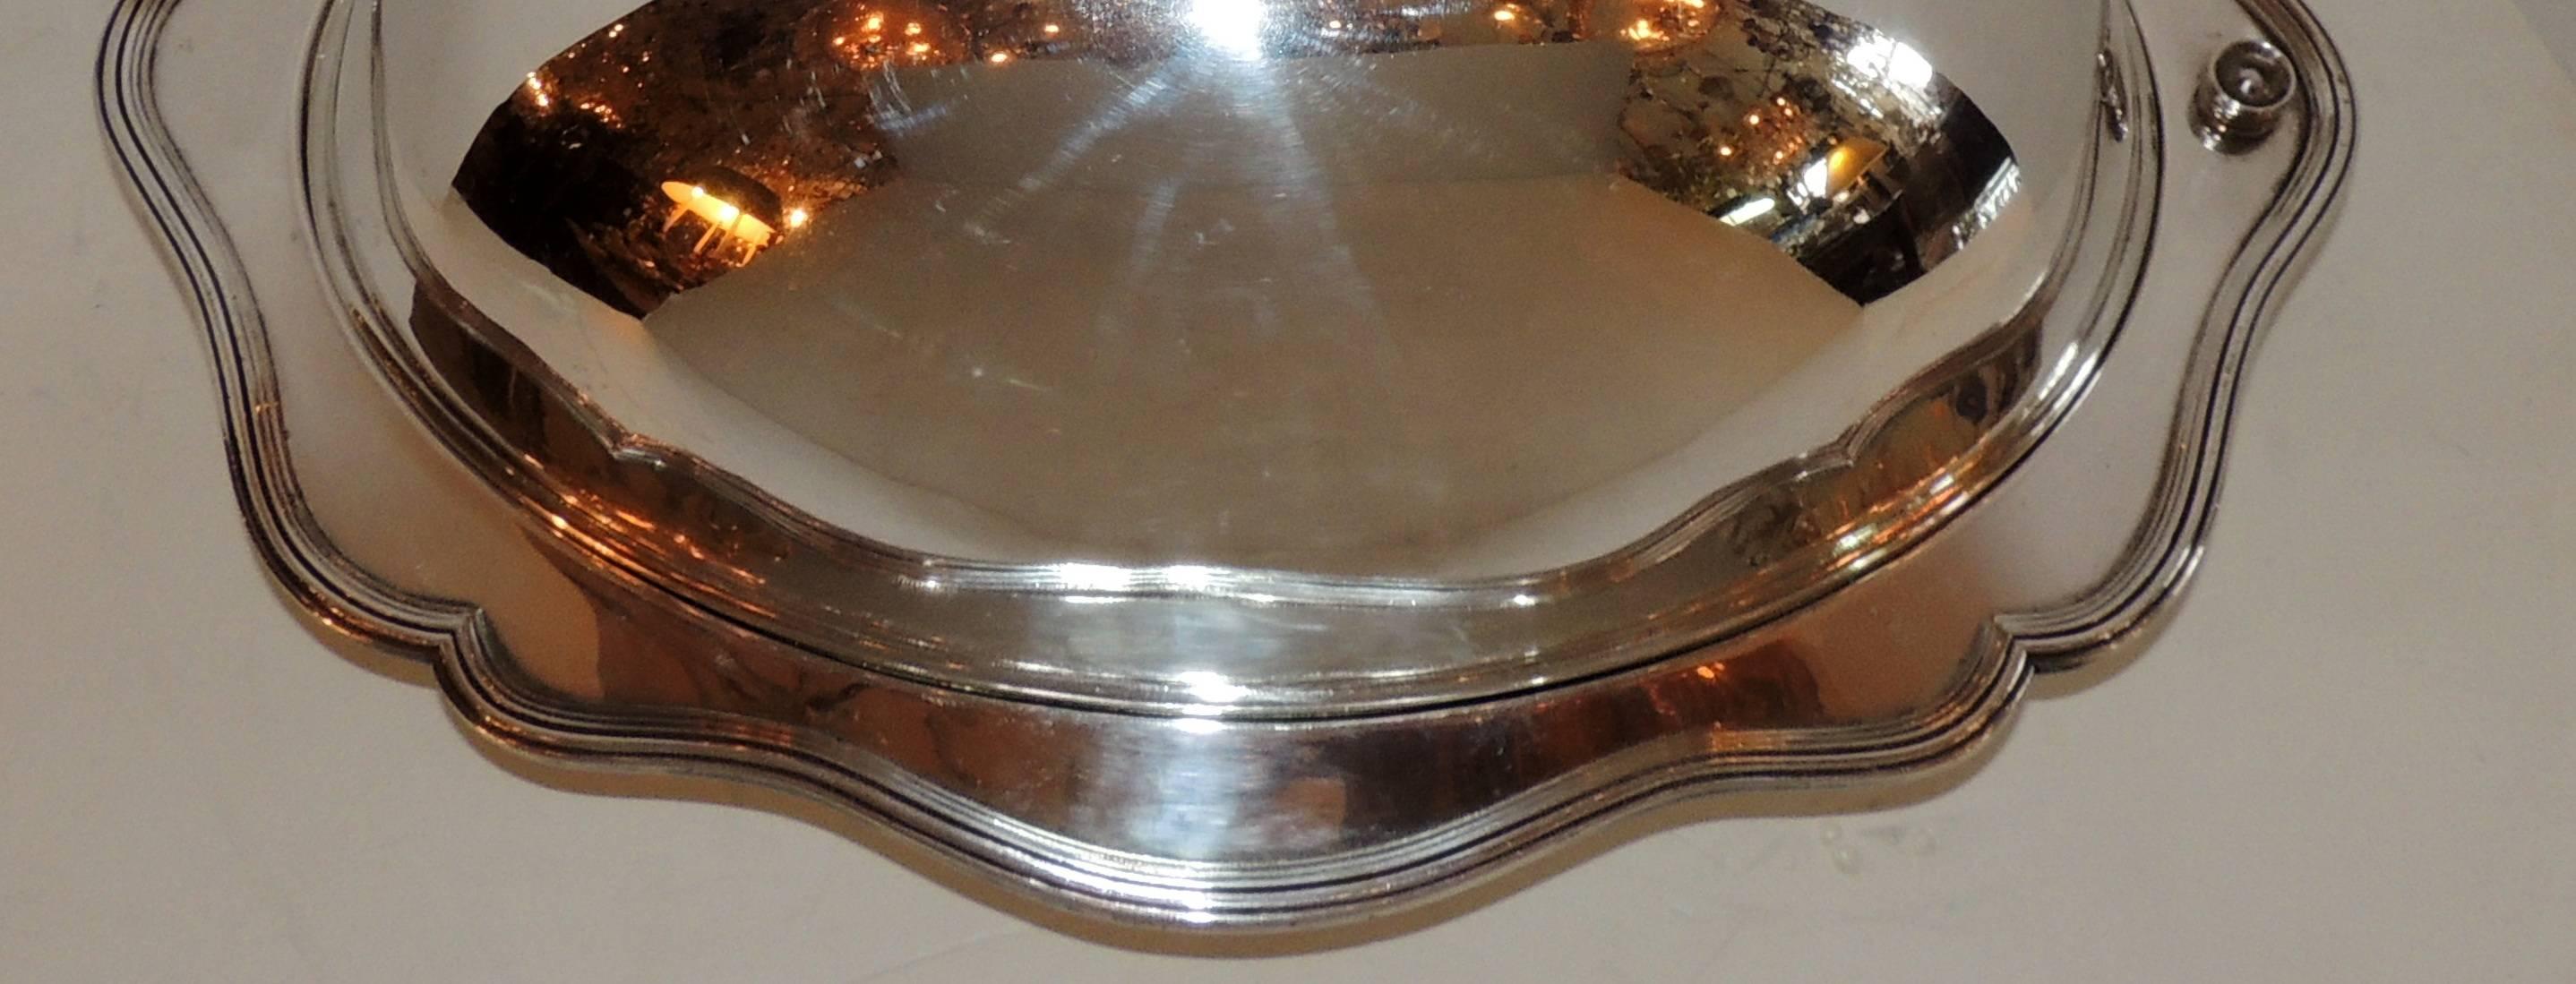 A wonderful antique silver plated meat/Turkey dome Victorian cloche large serving two-piece tray and cover set, the bottom unscrews to allow for hot water to maintain the hot foods temperature.

Tray: 20"W X 15"D X 3"H
Cover: 16